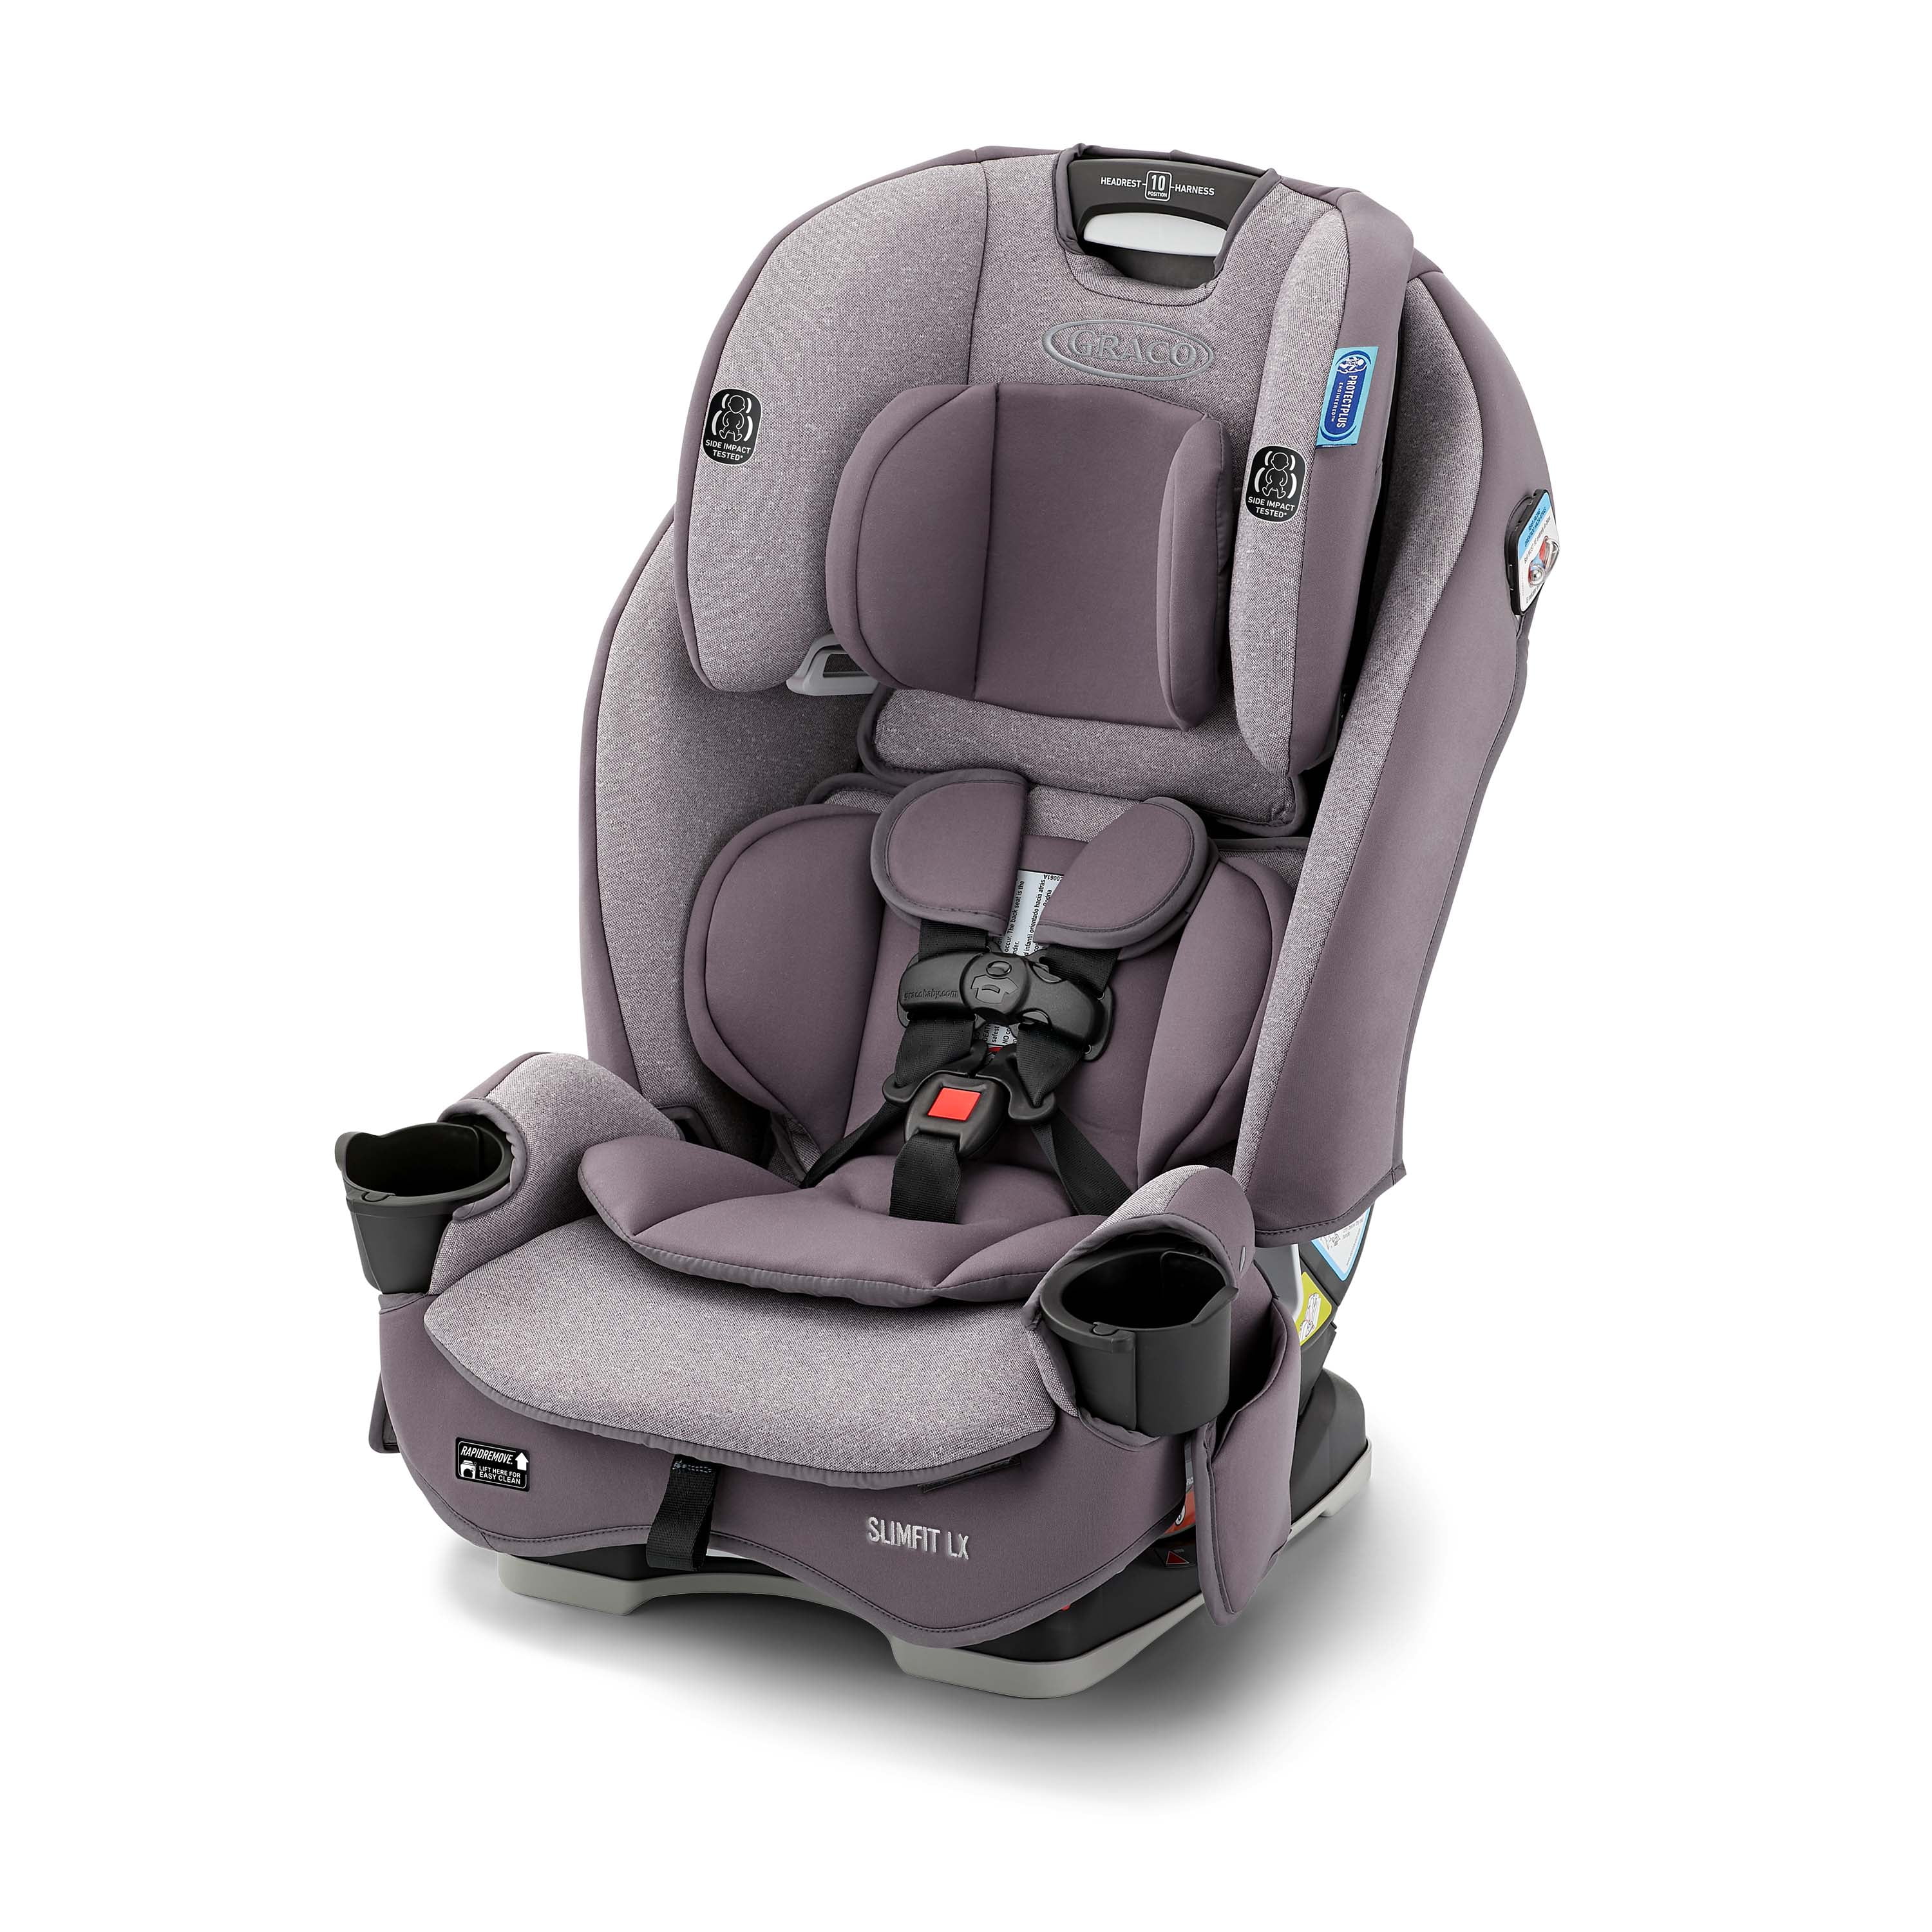 Best Slim Car Seat for Travel? Graco SlimFit All-In-One Convertible Car Seat  Review - Viva Veltoro